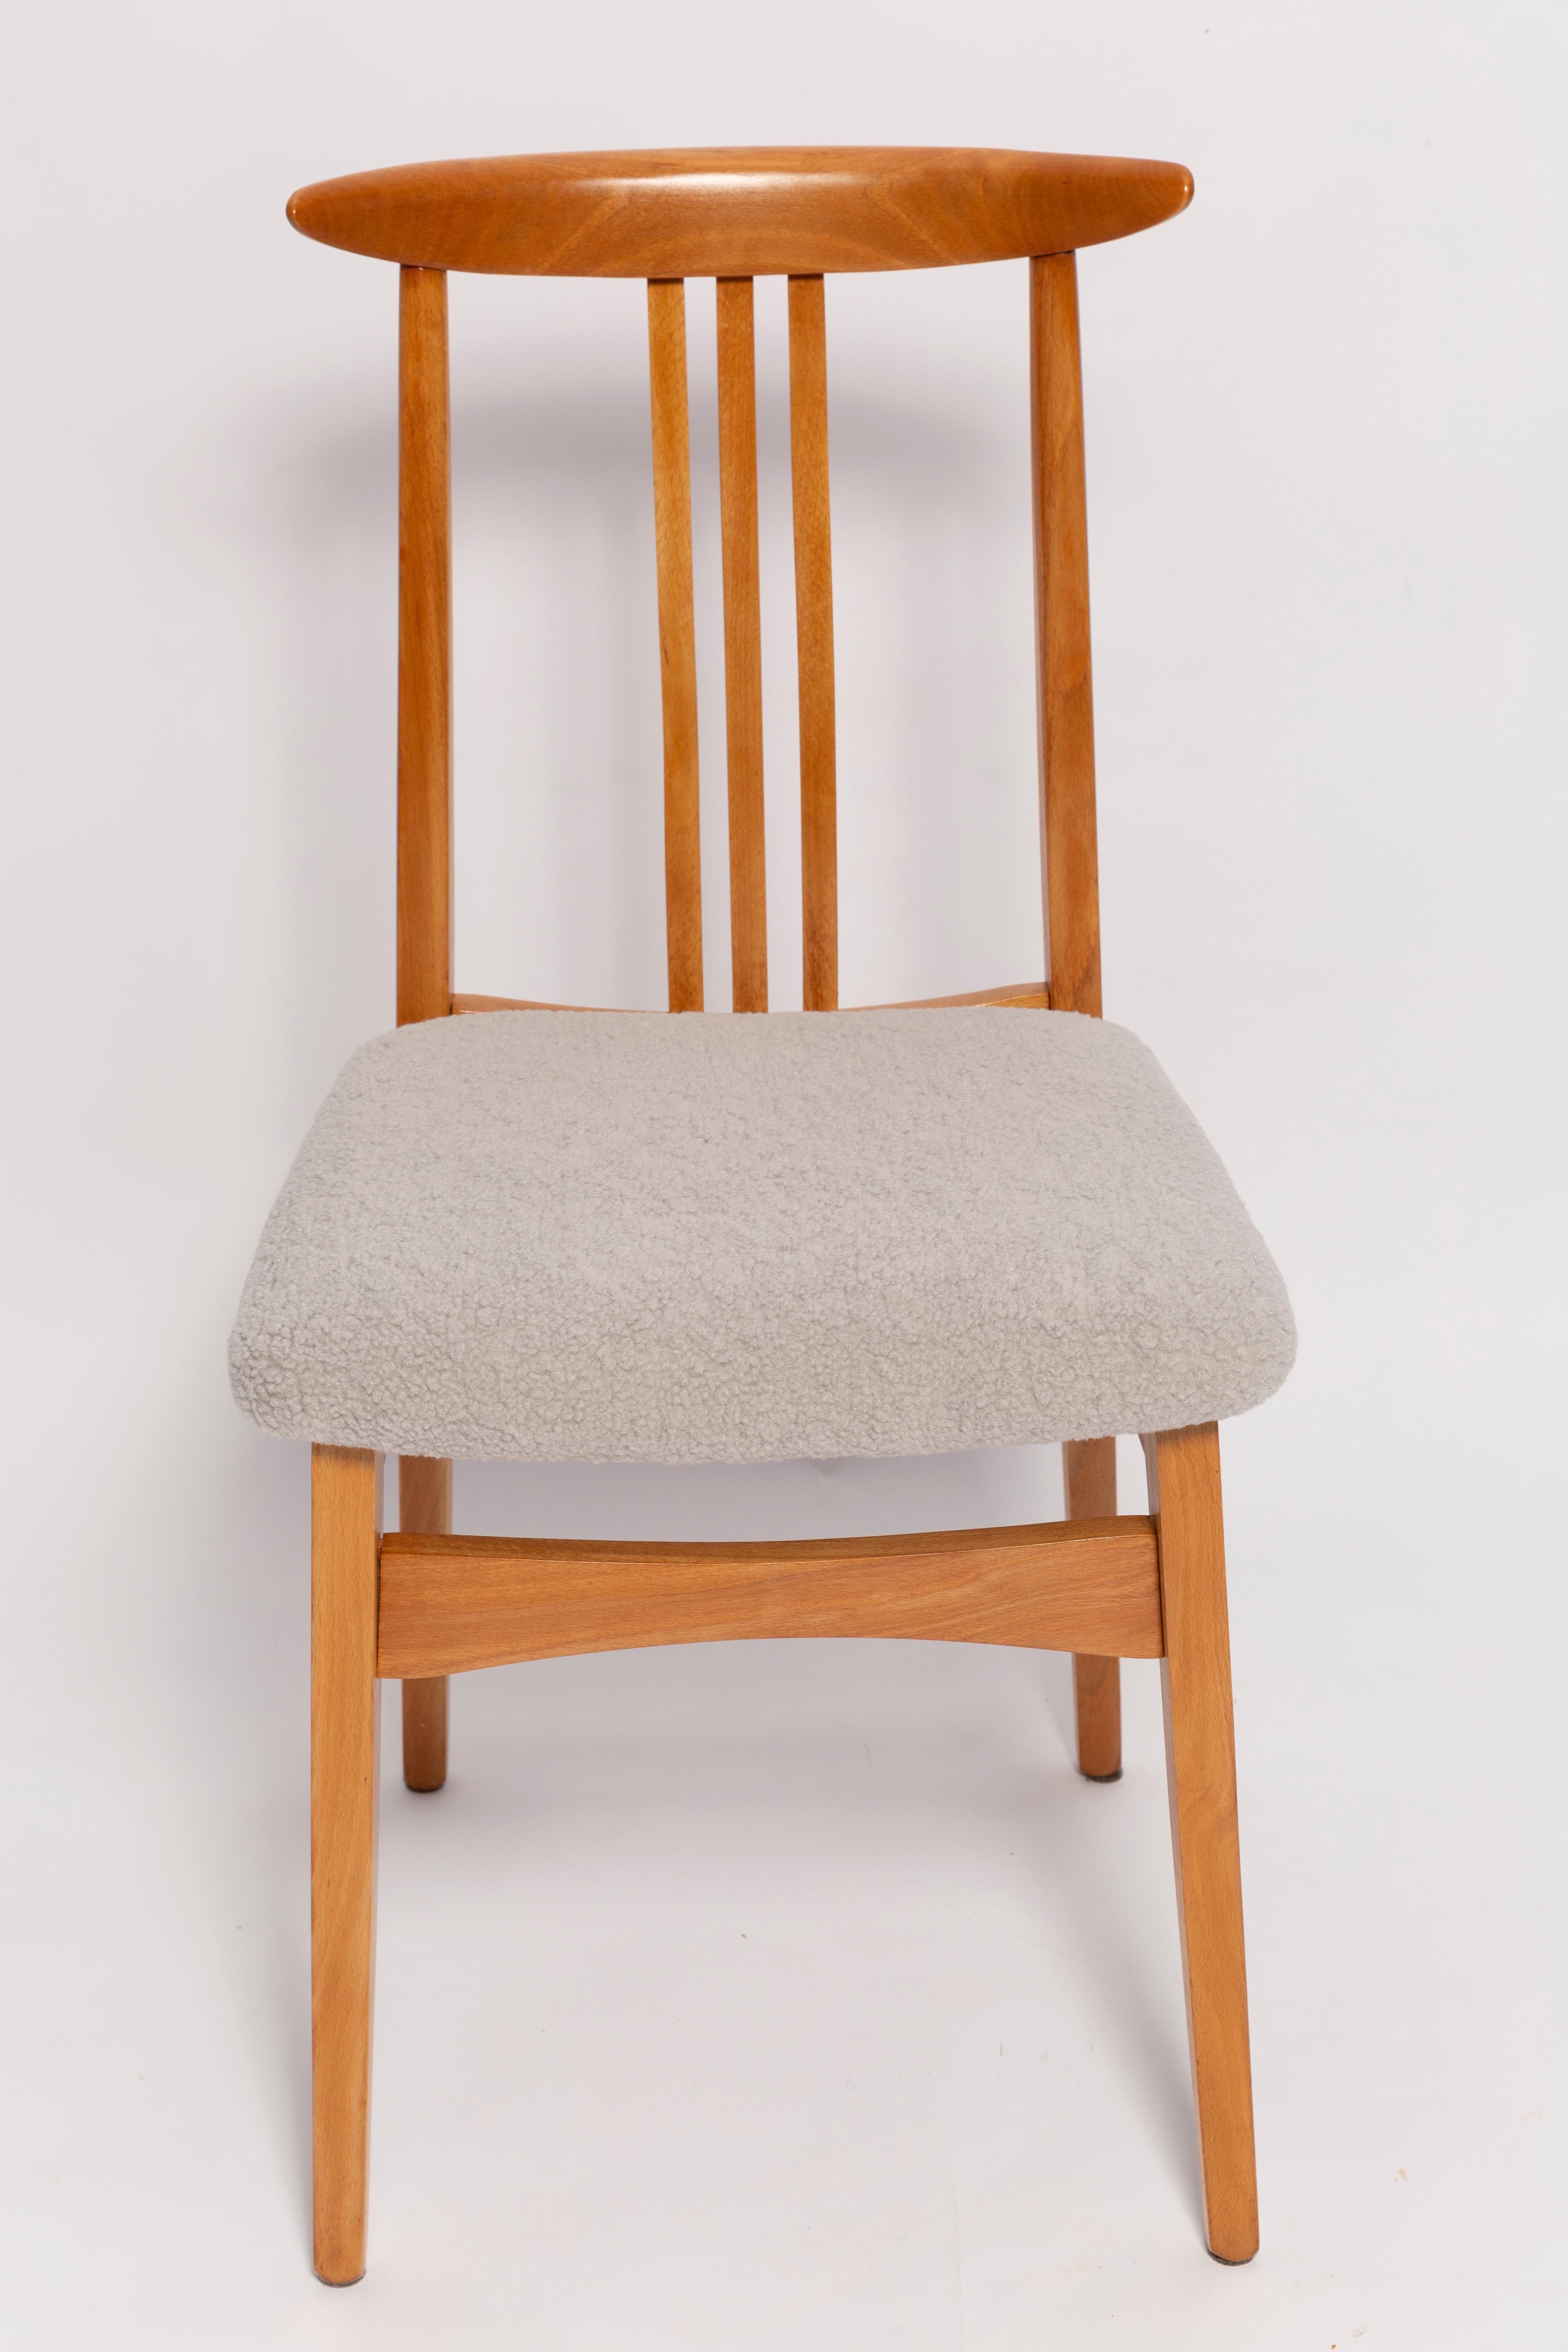 A beautiful beech chair designed by M. Zielinski, type 200 / 100B. Manufactured by the Opole Furniture Industry center at the end of the 1960s in Poland. The chair is after undergone a complete carpentry and upholstery renovation. Seats covered with